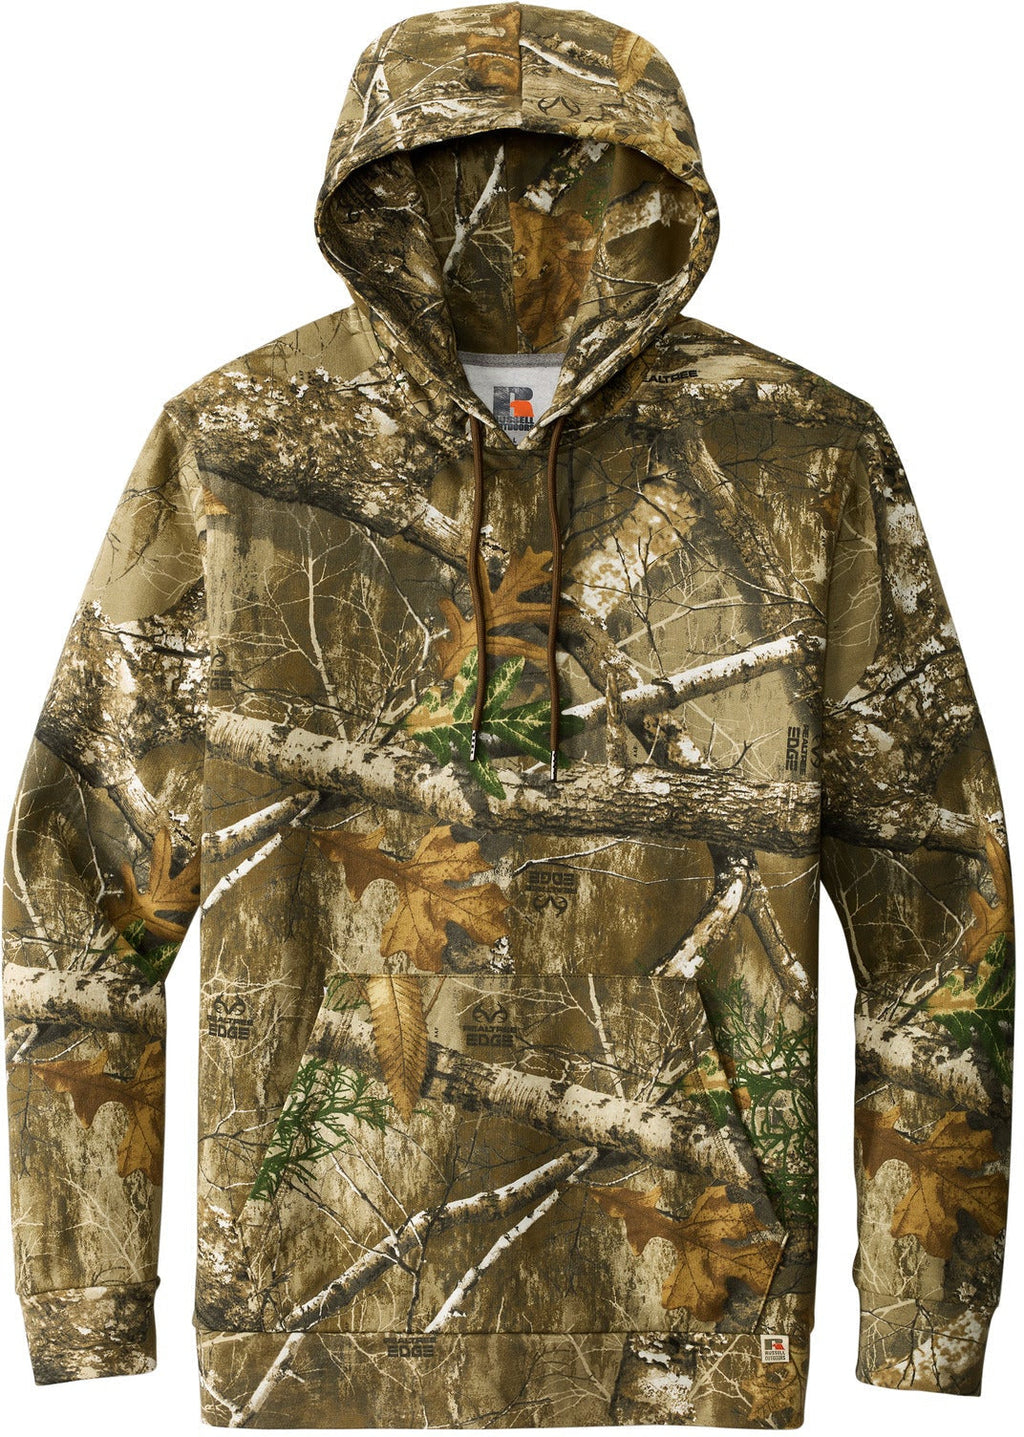 Russell Outdoors Realtree Pullover Hoodie With Custom Embroidery, RU400